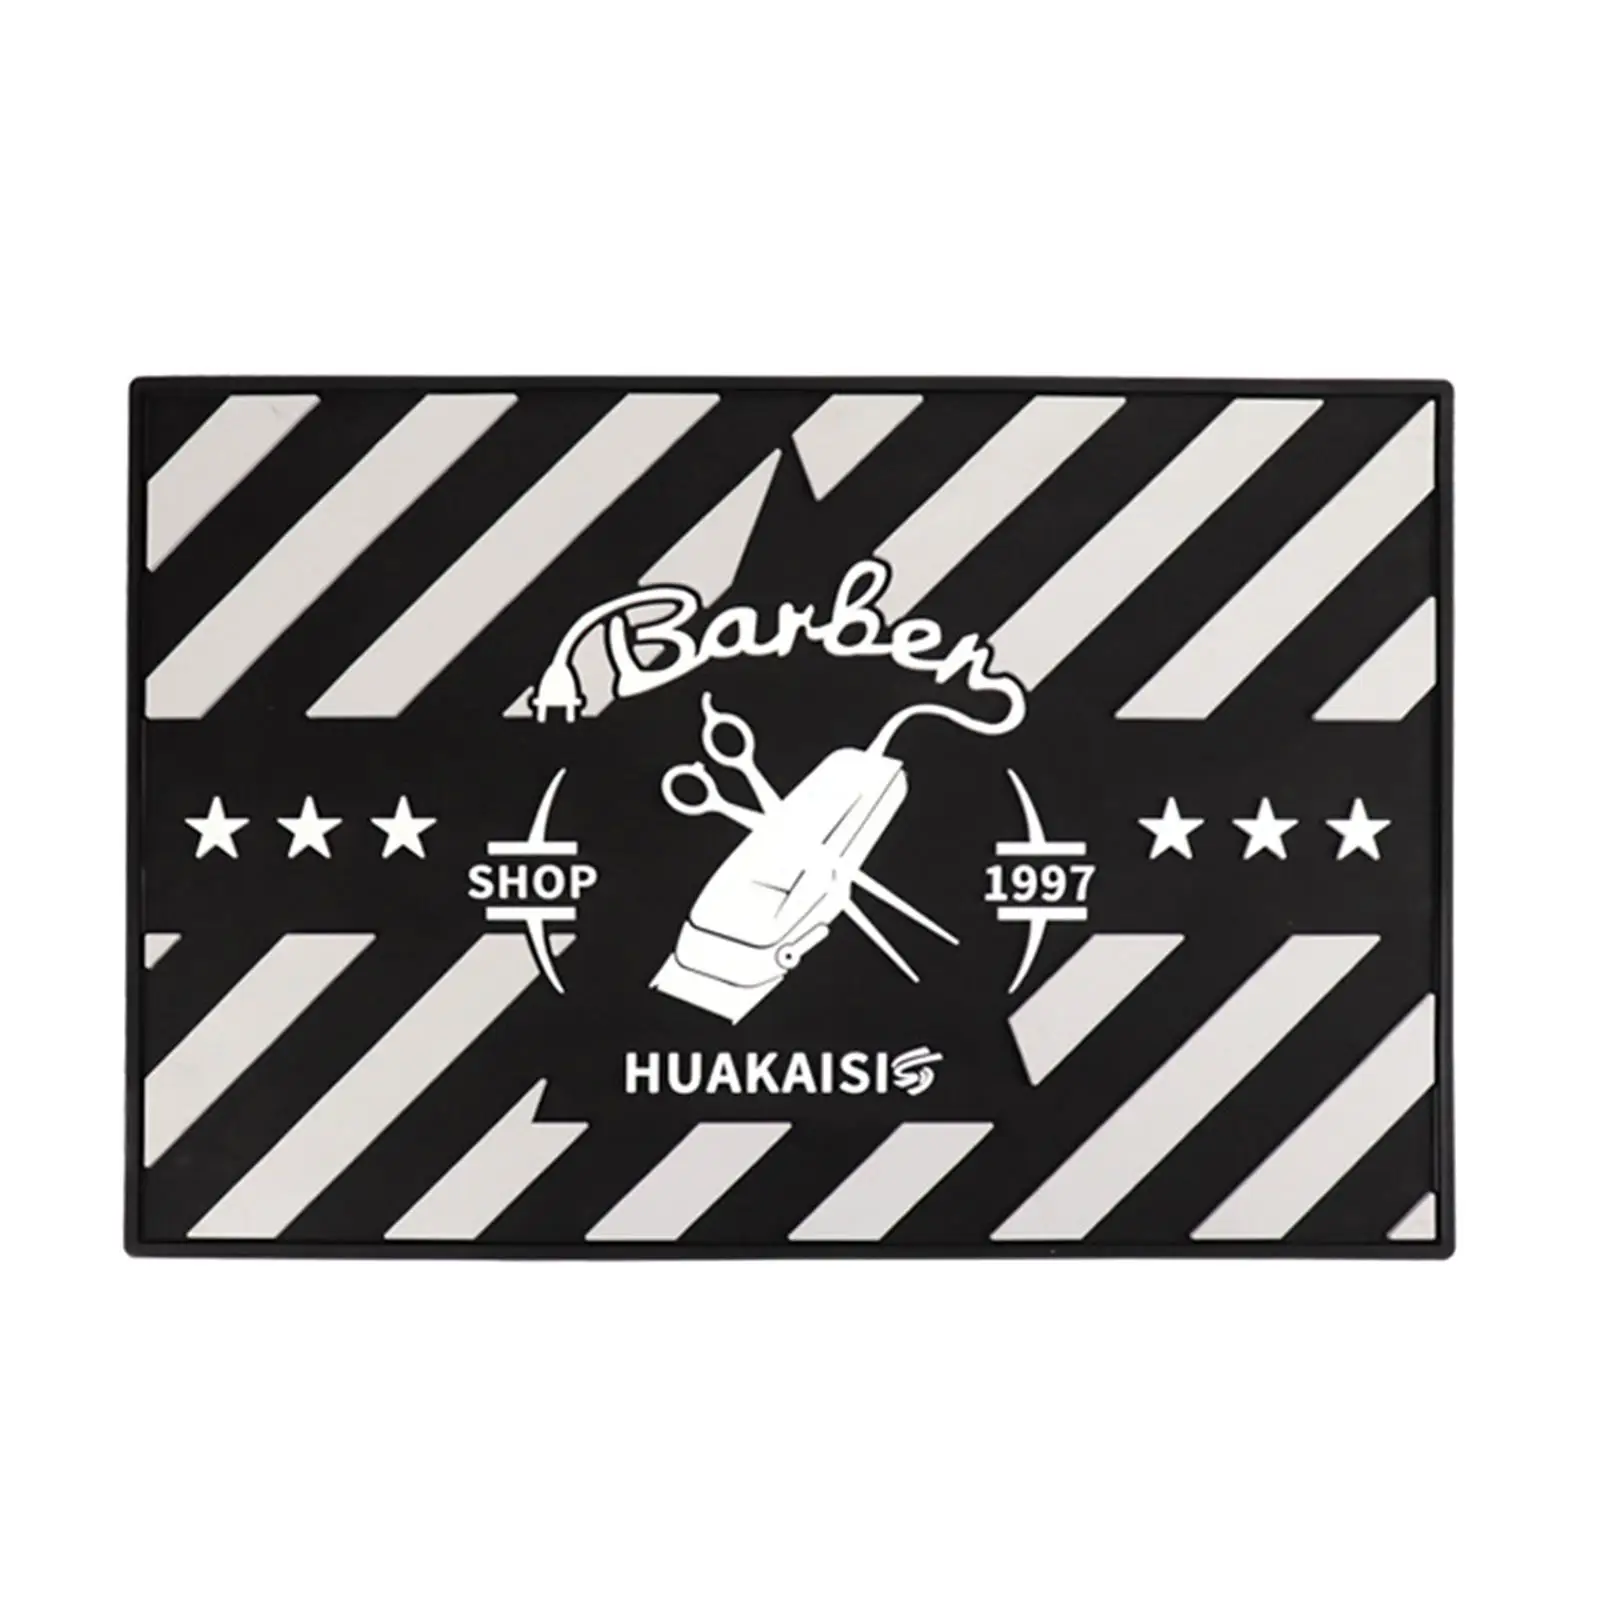 Anti-Skid Hairdressing Mat Silicone Mat Flexible Resistant Countertop Nano PU for Barbershop Hair  Hairdressing Tools Scissors